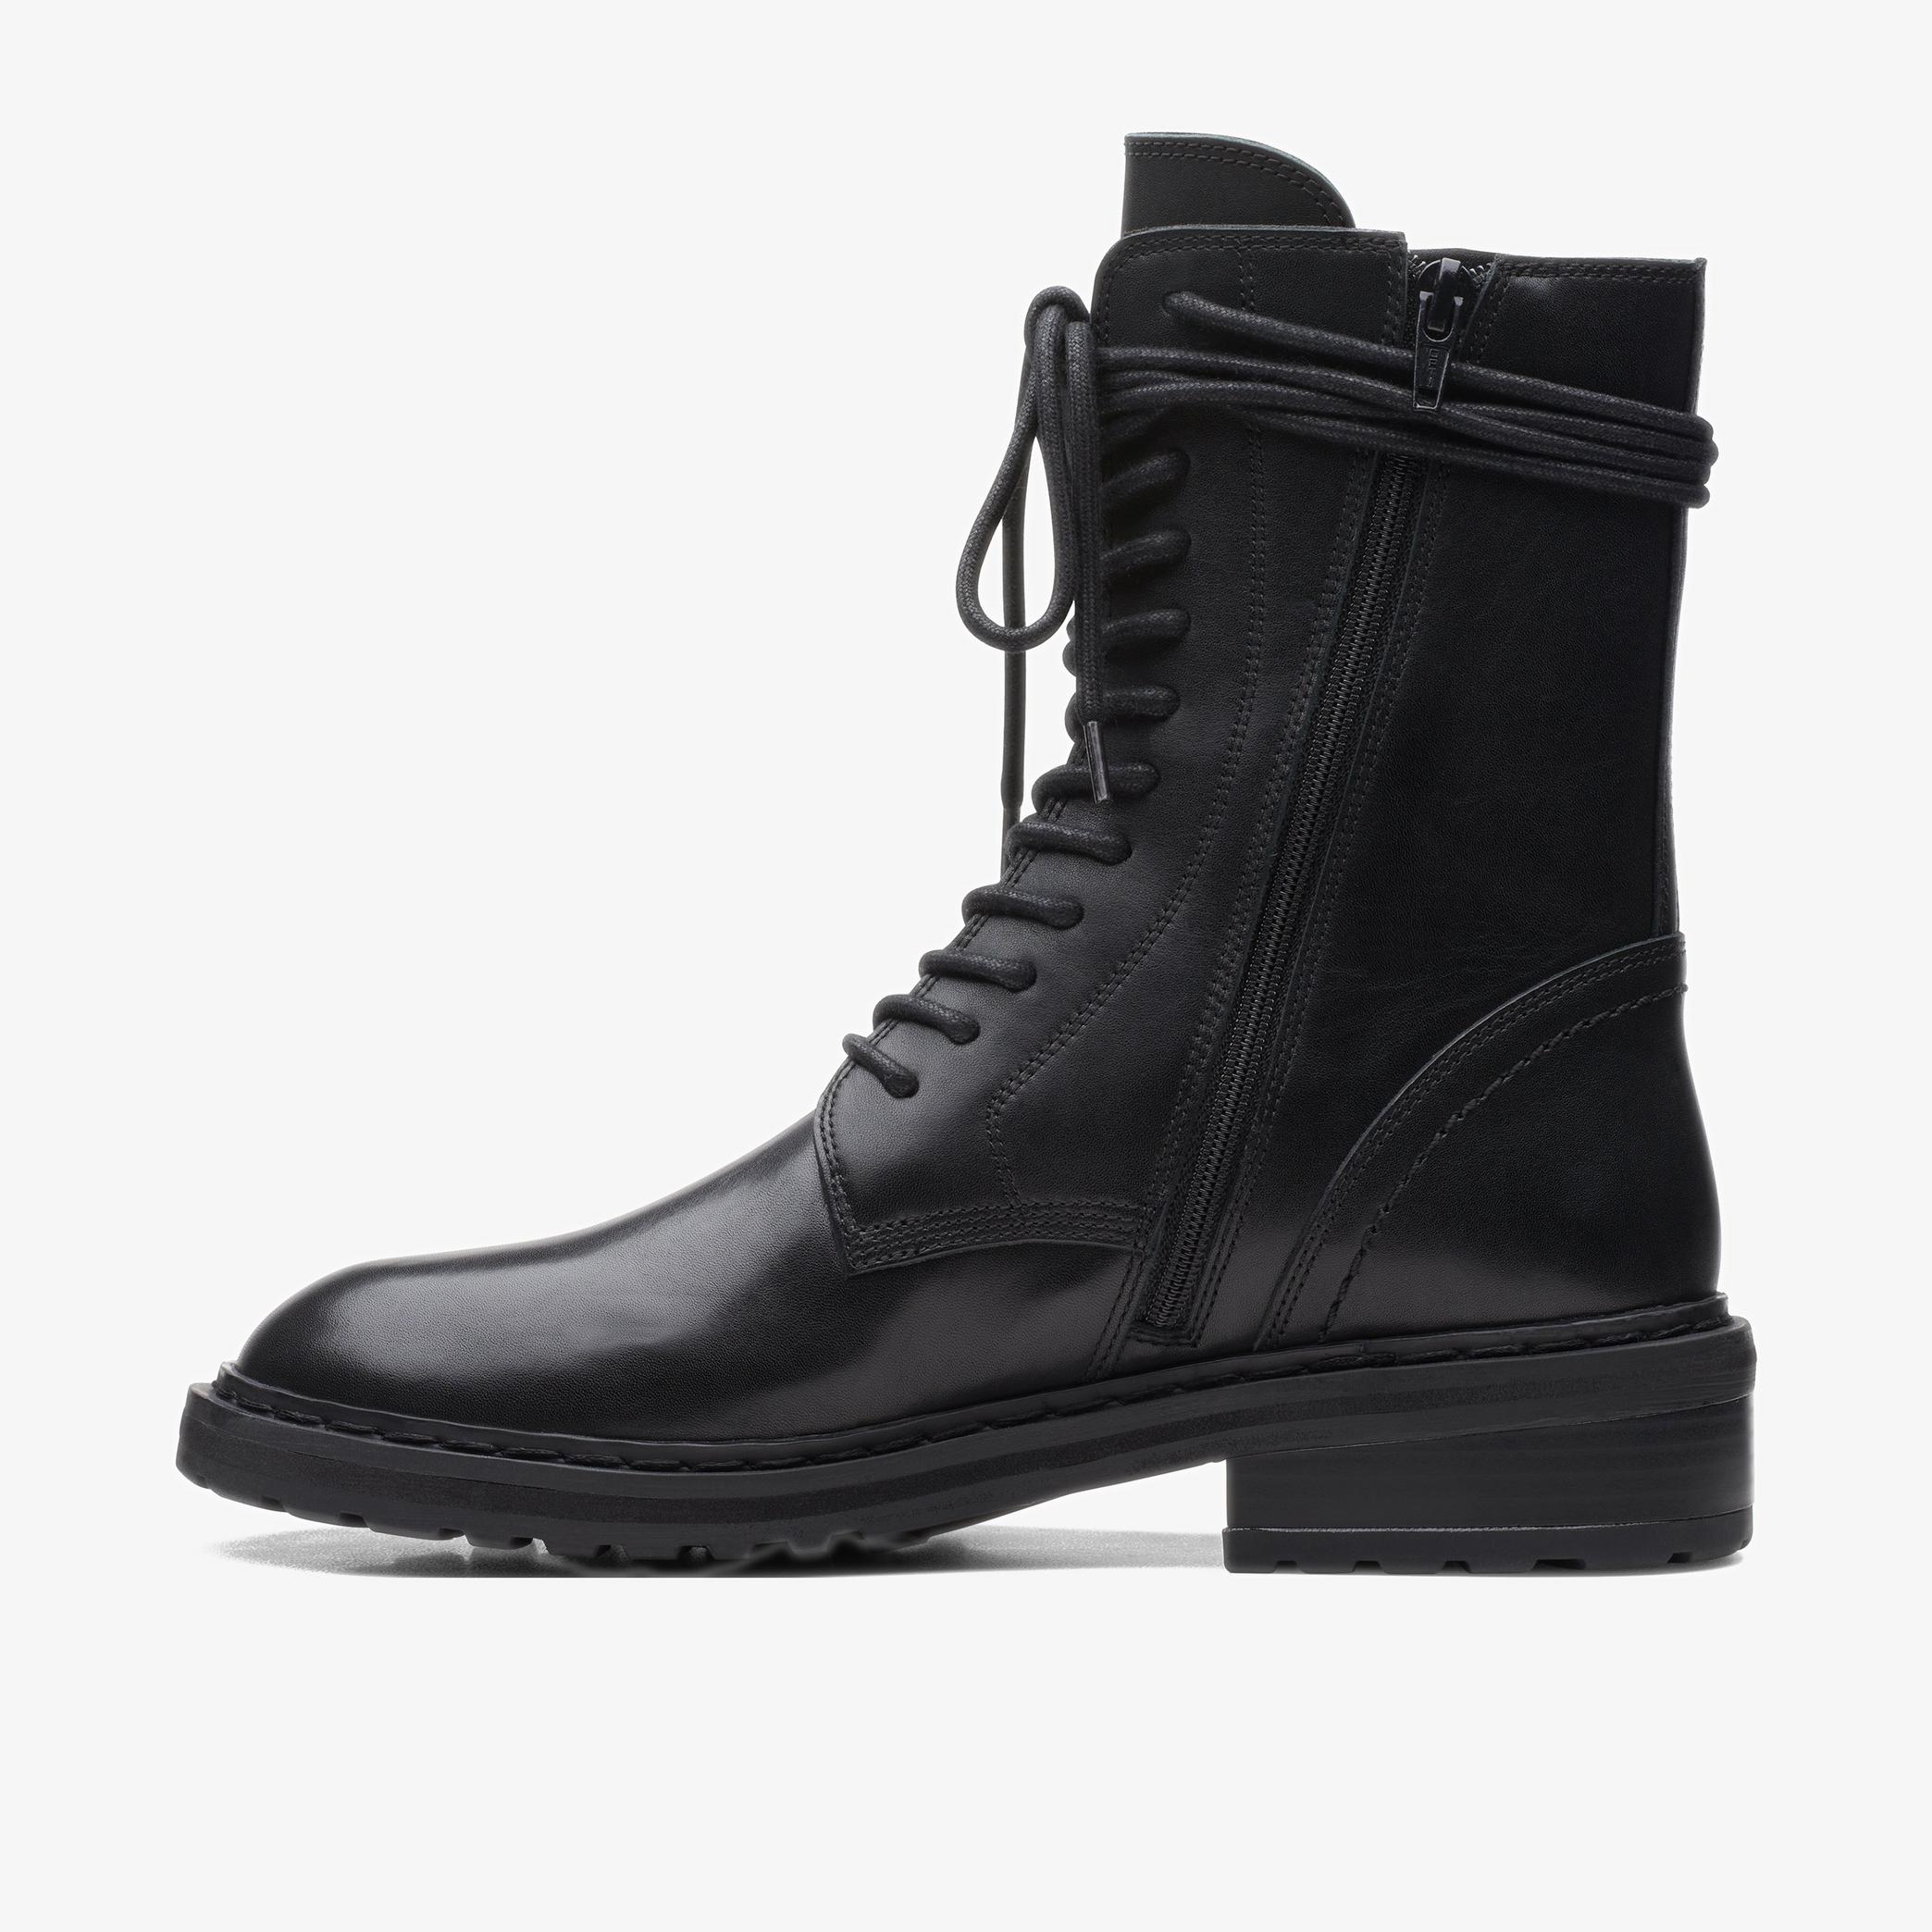 Tilham Lace Black Leather Ankle Boots, view 2 of 6